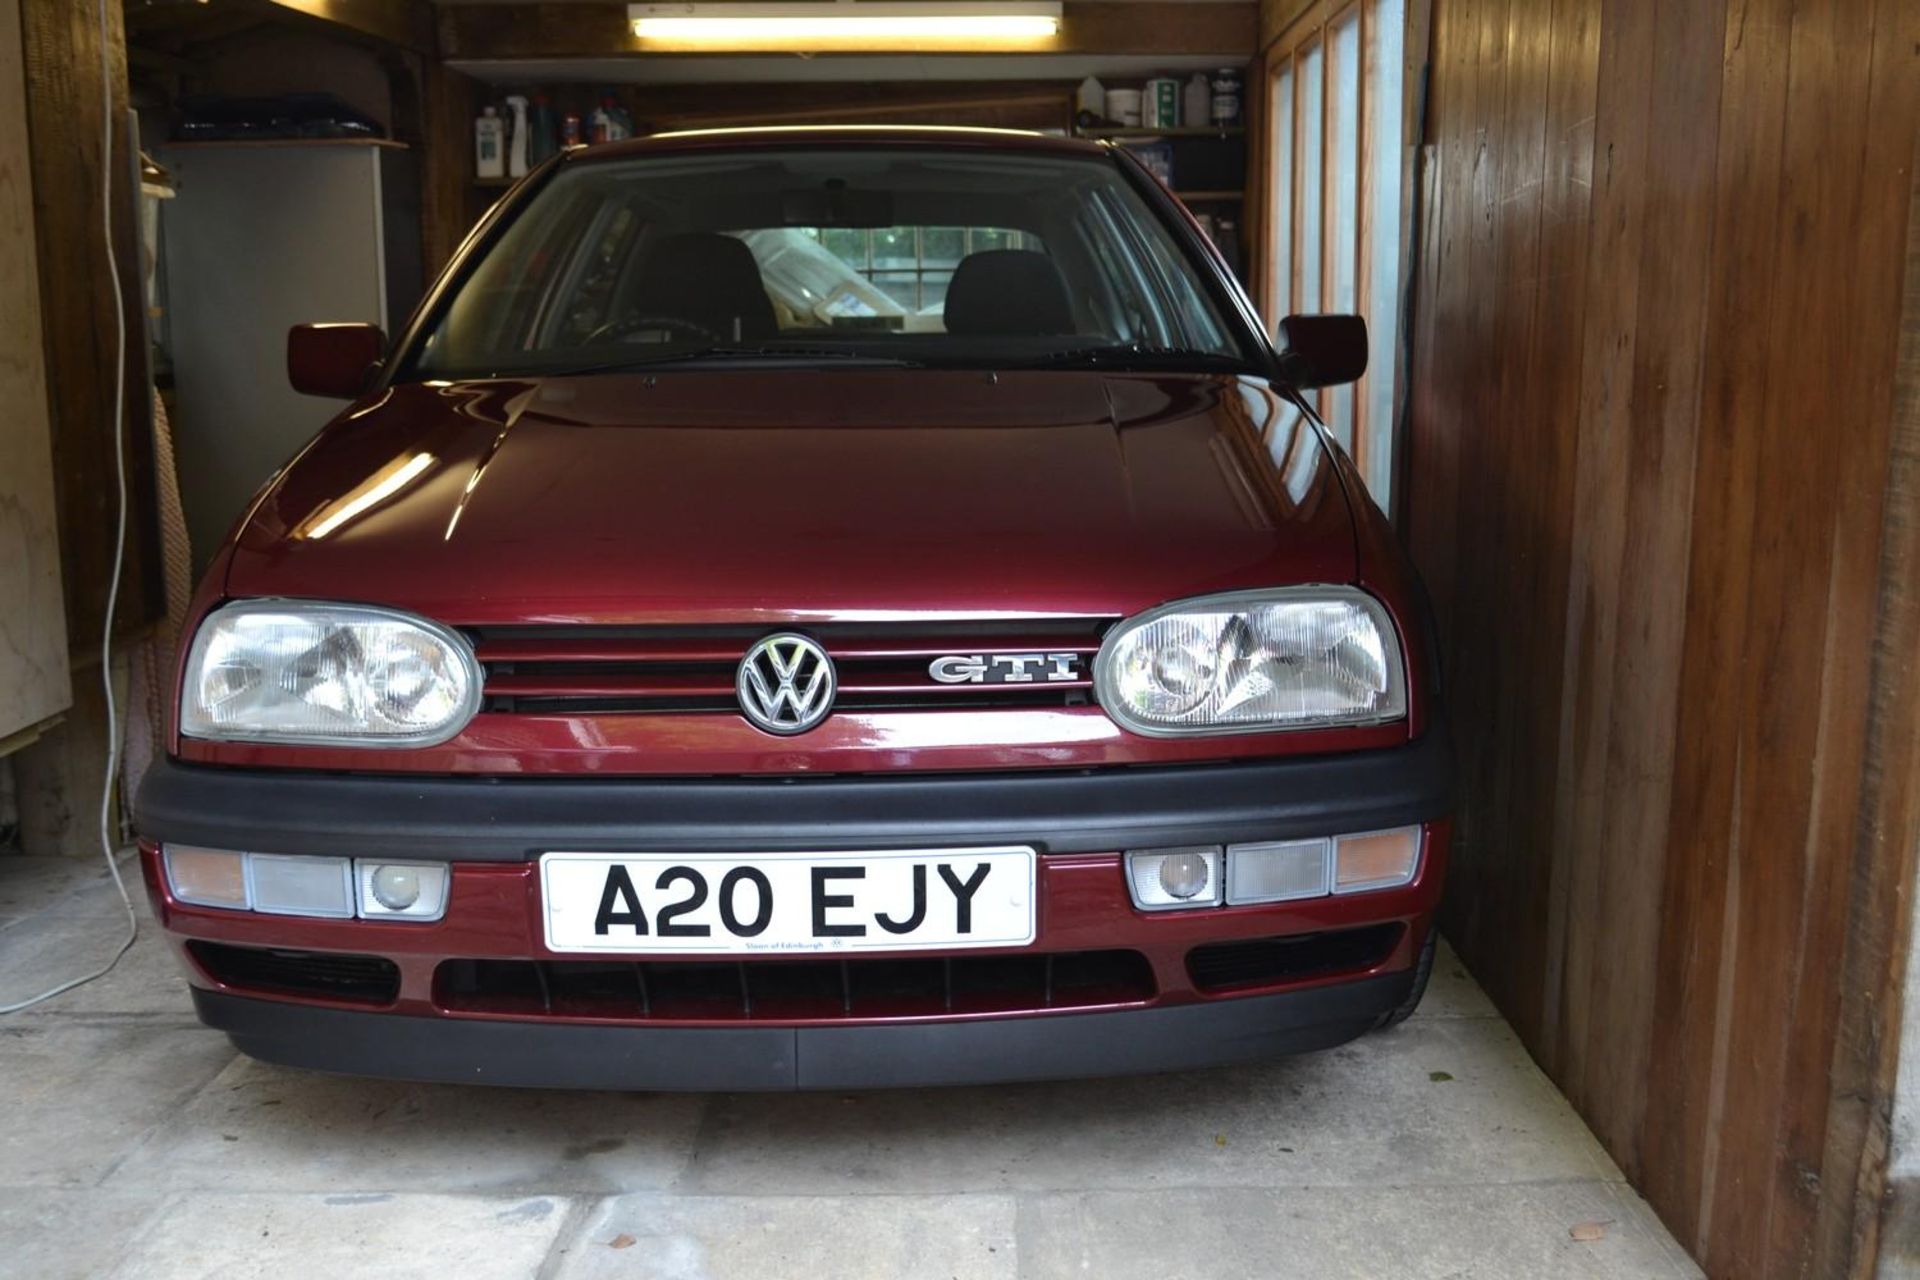 A 1996 VW Golf GTI Registration number A20 EJY Chassis number WVWZZZ1HZVW185360 Engine number - Image 7 of 55